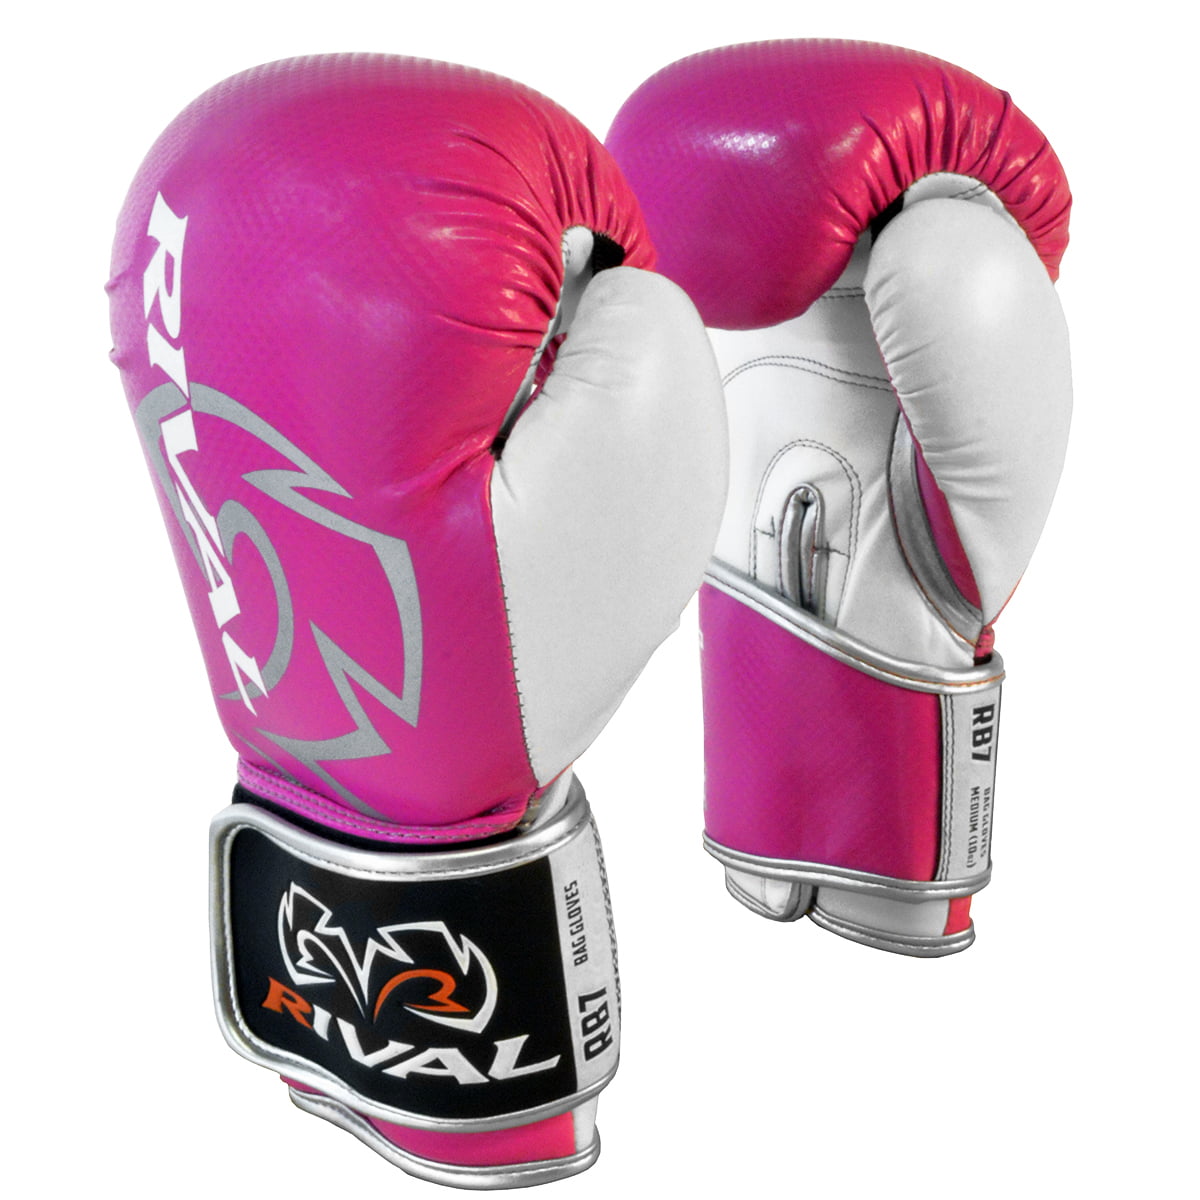 Rival Boxing Bag Gloves RB7 training Fitness Purple 